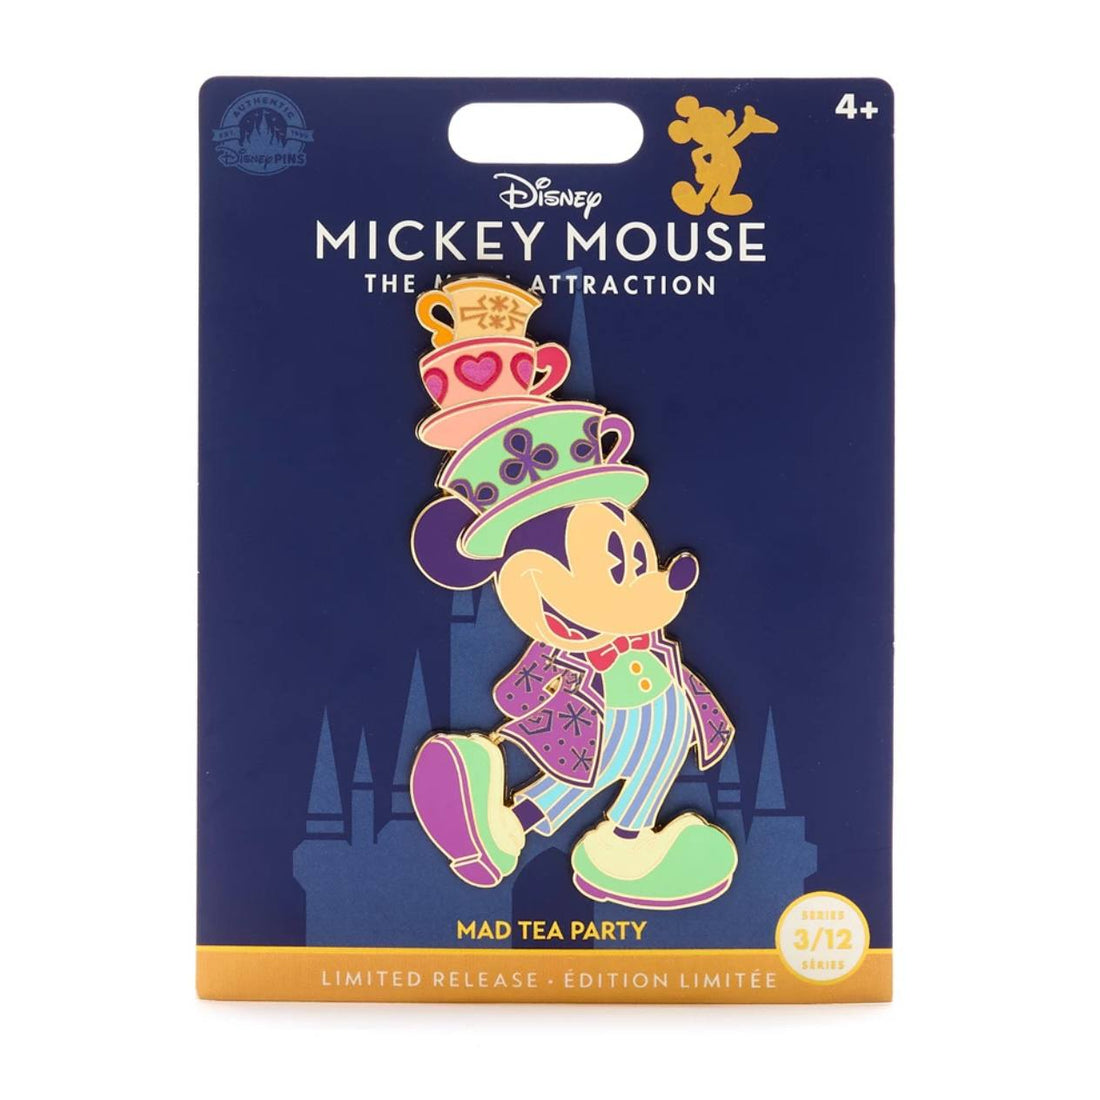 Mickey Mouse: The Main Attraction Pin, Series 3 of 12